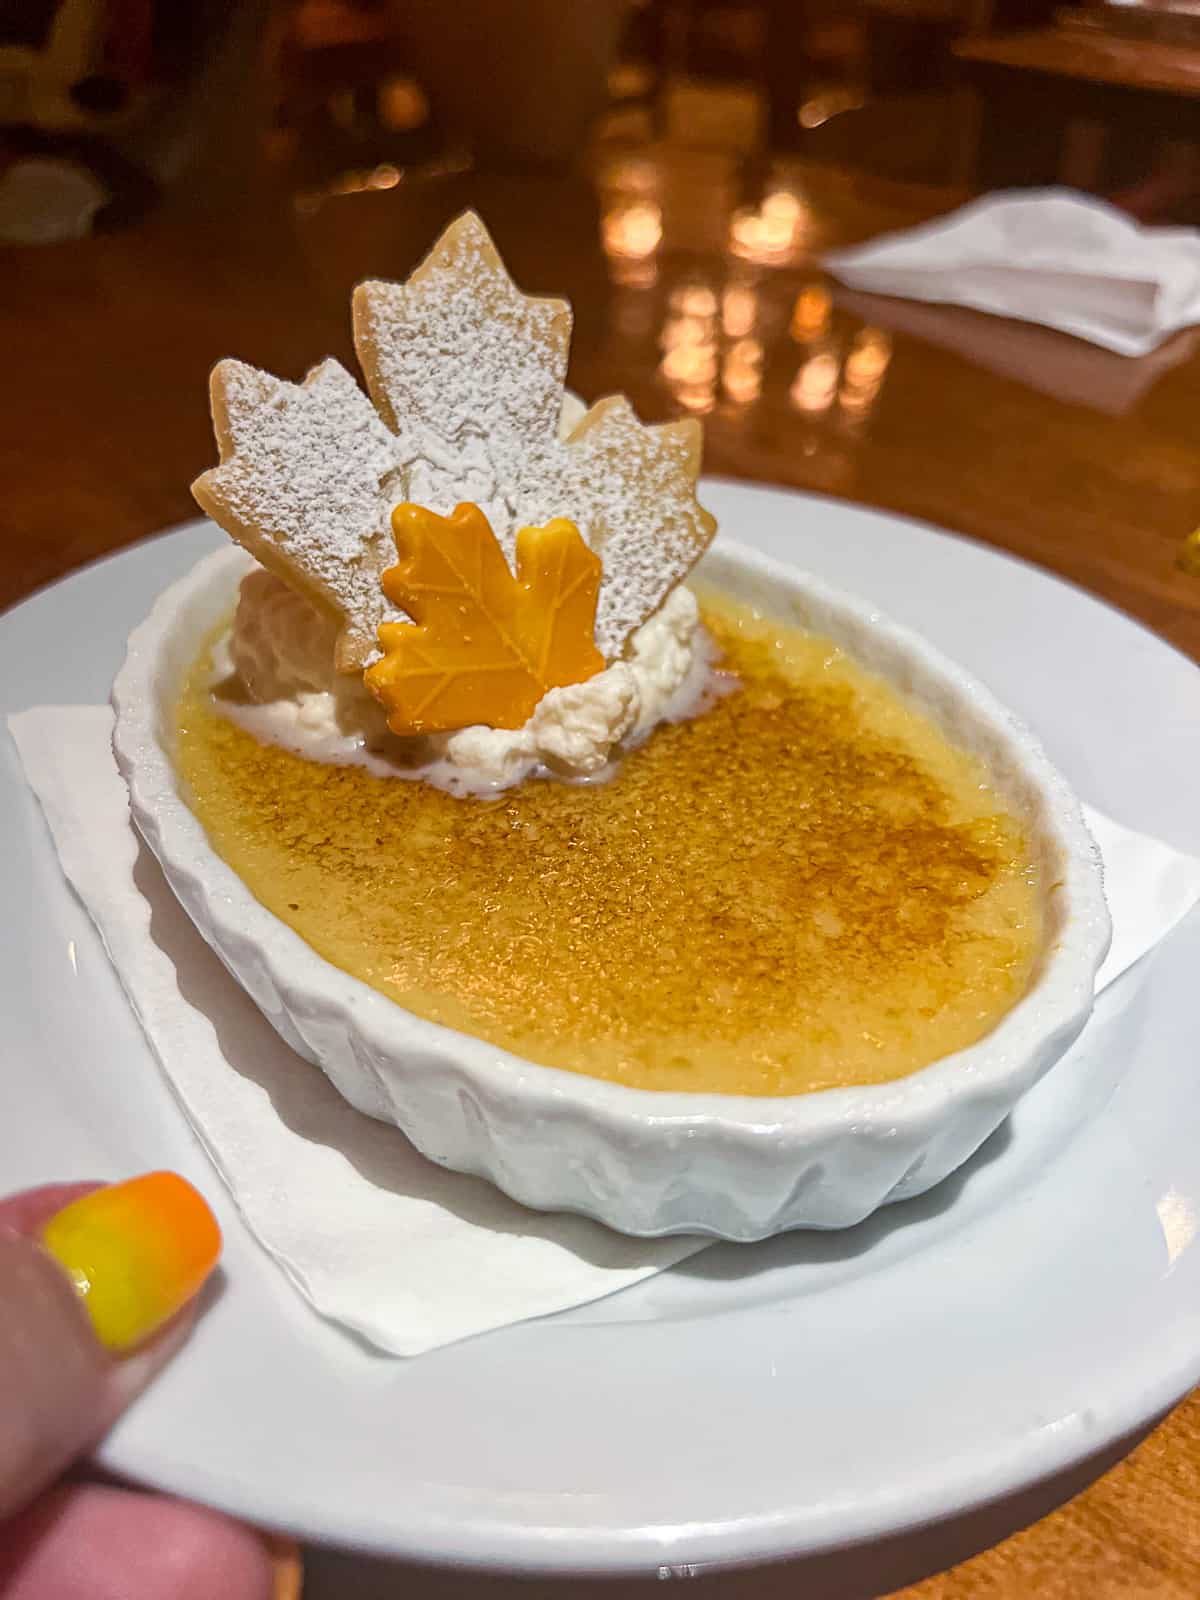 Maple Creme Brulee Dessert at Le Cellier Restaurant in Canada Pavilion at Epcot Park